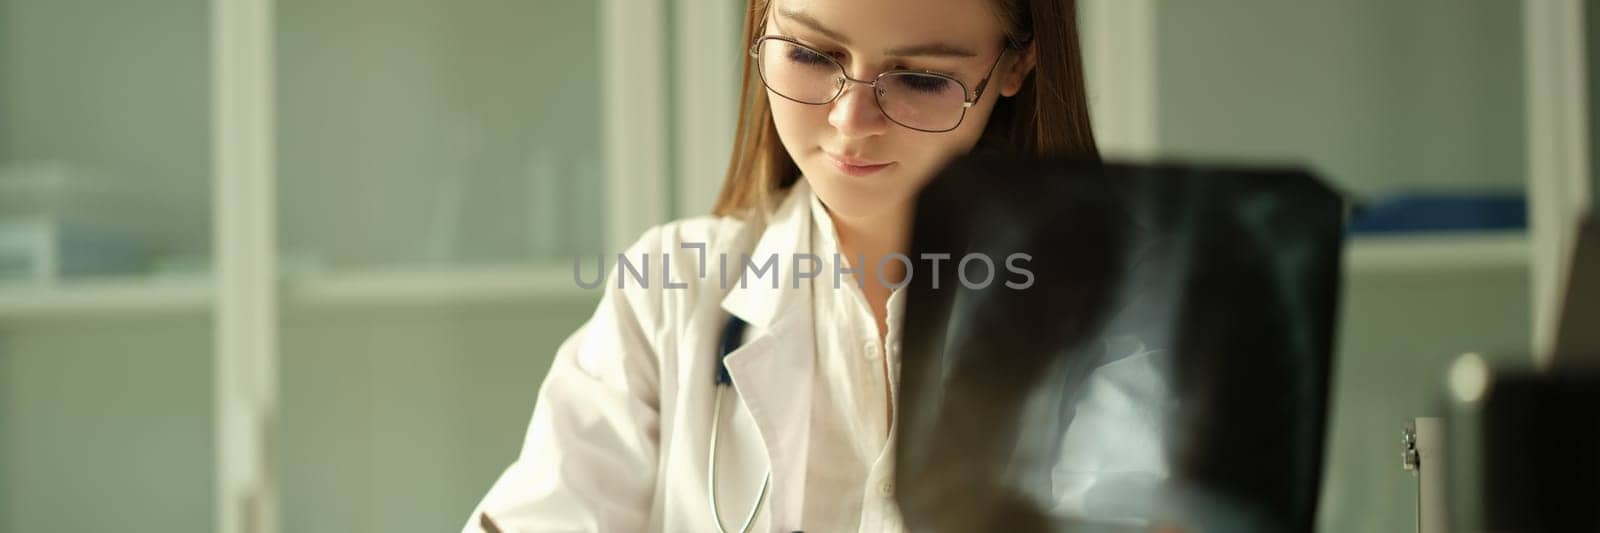 Doctor pulmonologist examining x-ray lungs and writing patient medical history in clinic. Xray diagnosis of pneumonia concept